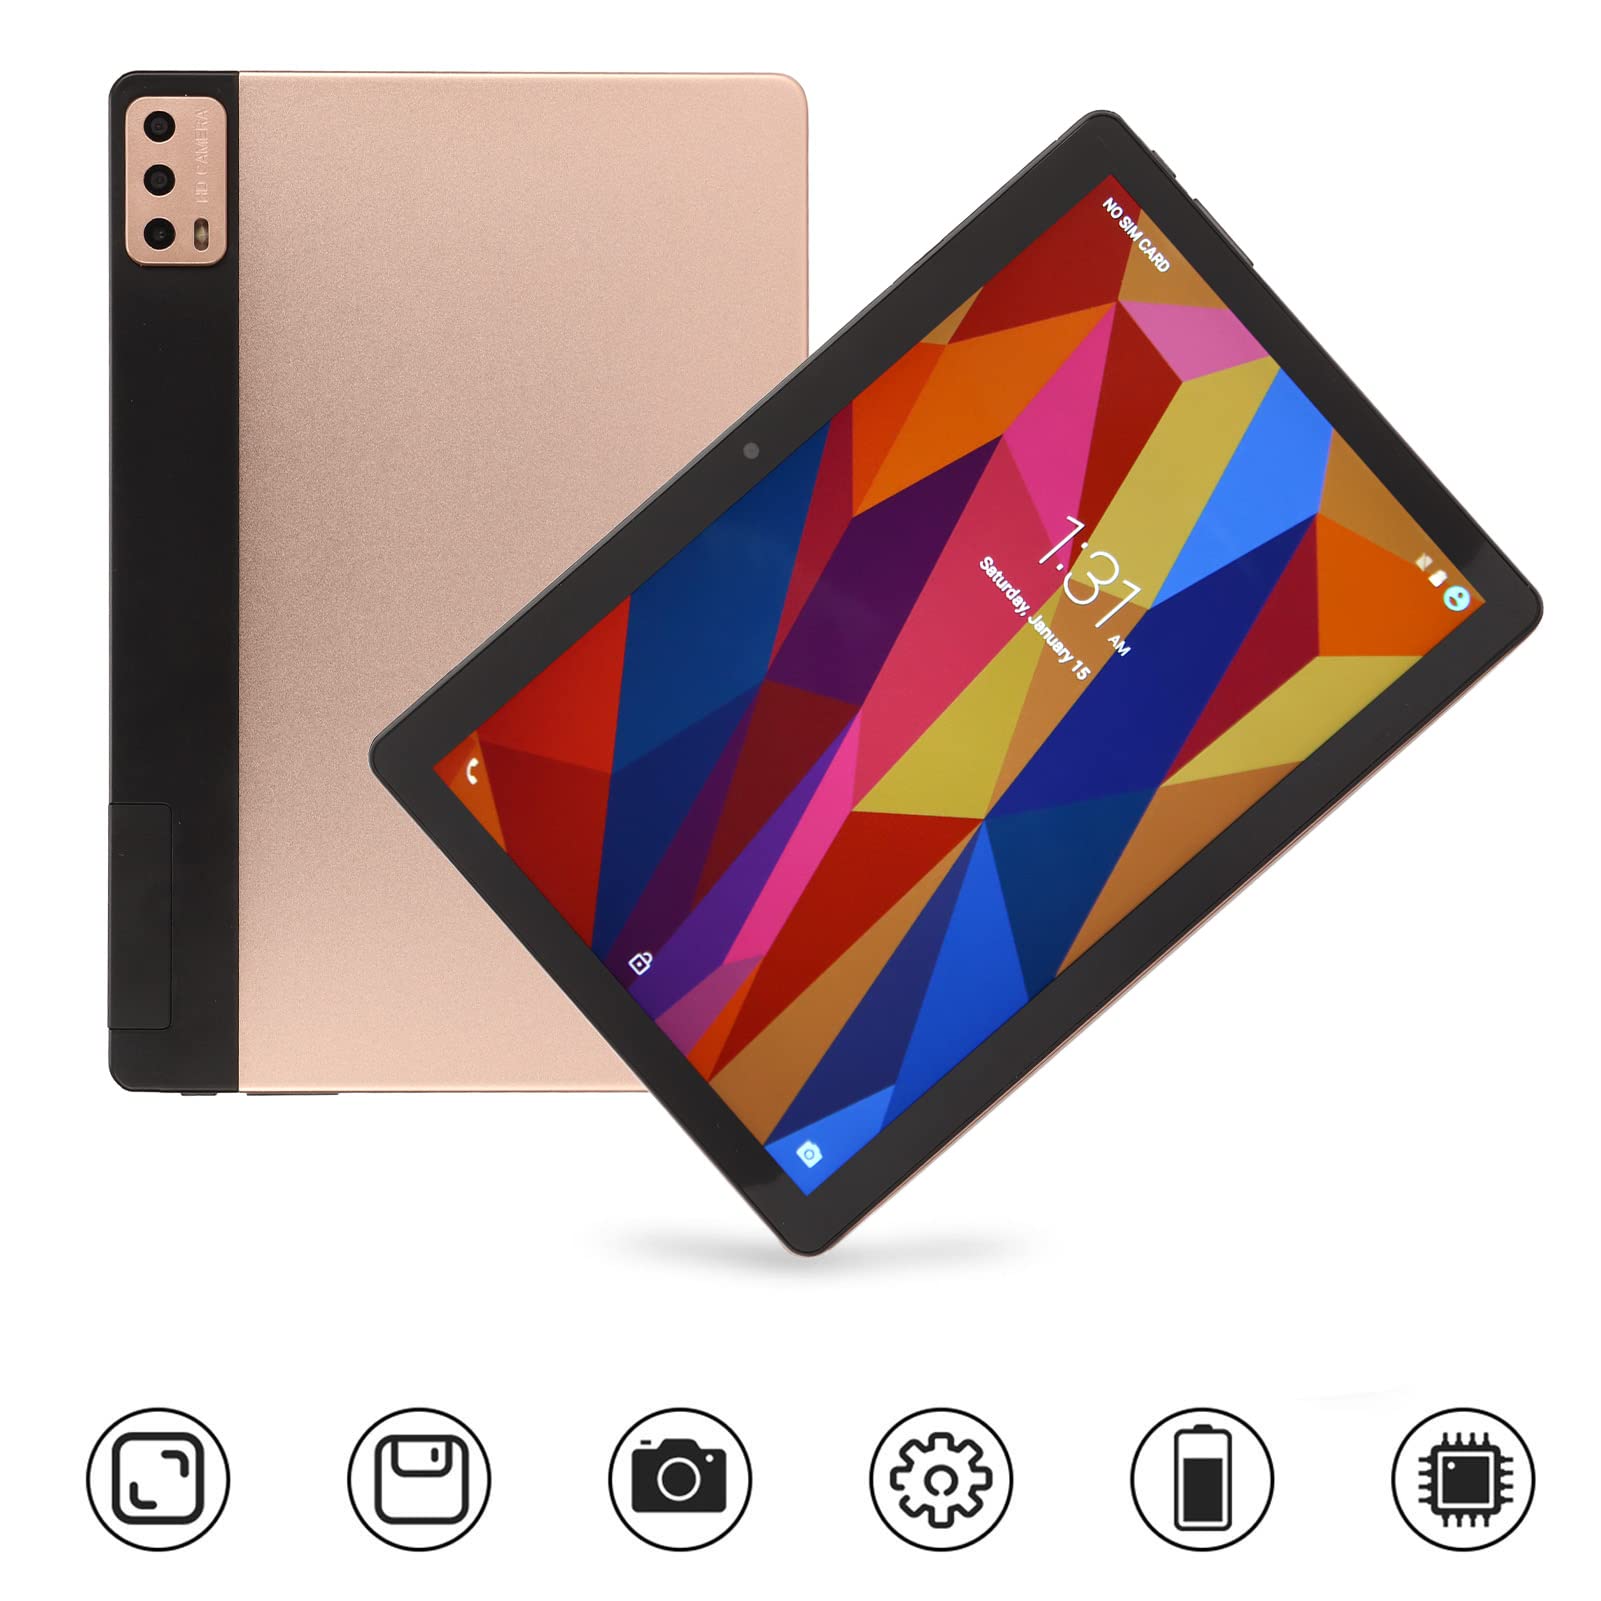 GLOGLOW Tablet, 5G WiFi Dual Band Tablet PC 4G RAM 128G ROM Call Support for Home for Travel (Gold)